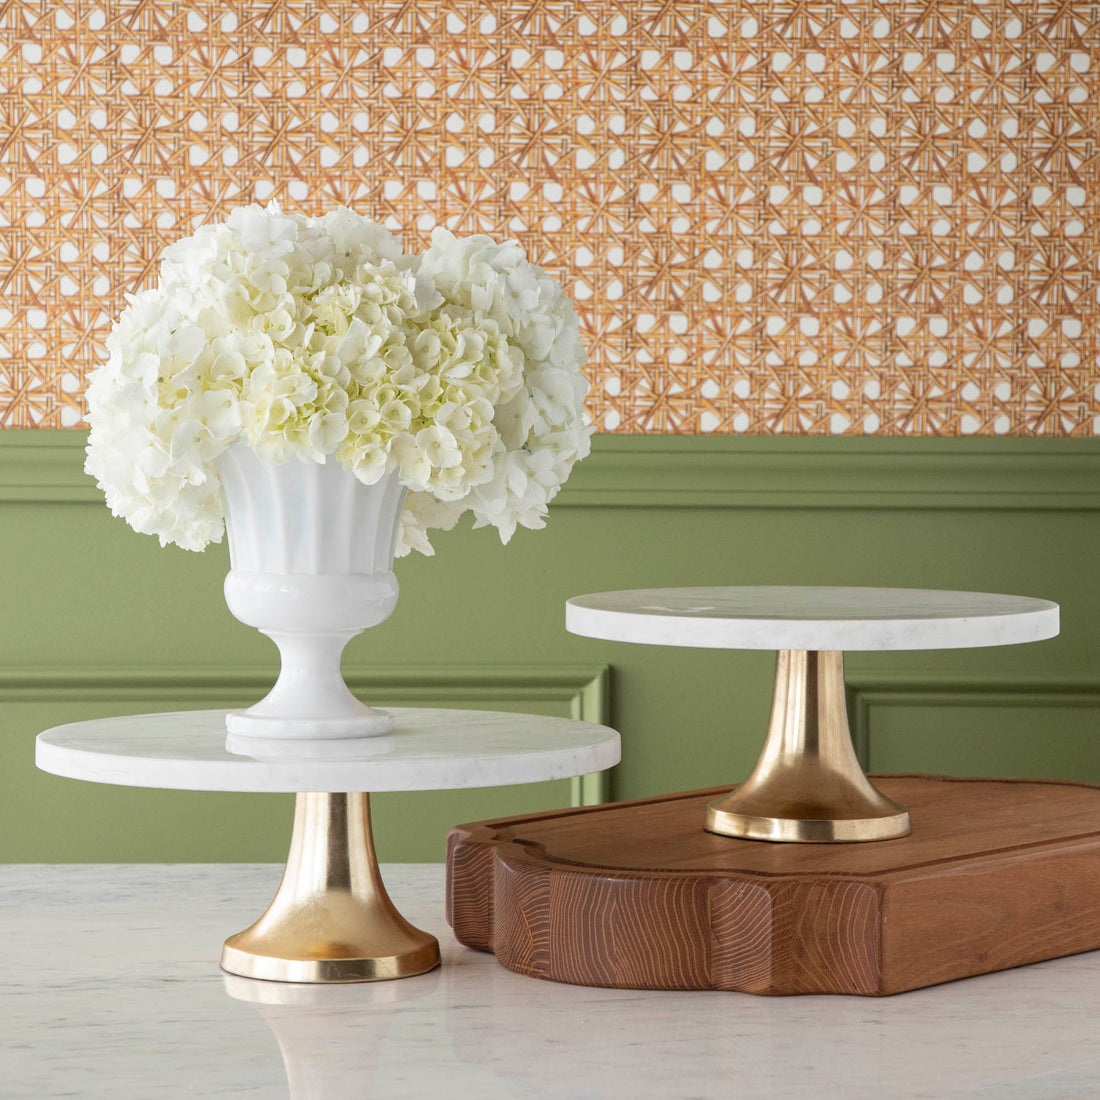 A bouquet of white hydrangeas in a white vase on a Bidk Home Marble Cake Plate with Antique Brass Base with decorative tables and a textured background.